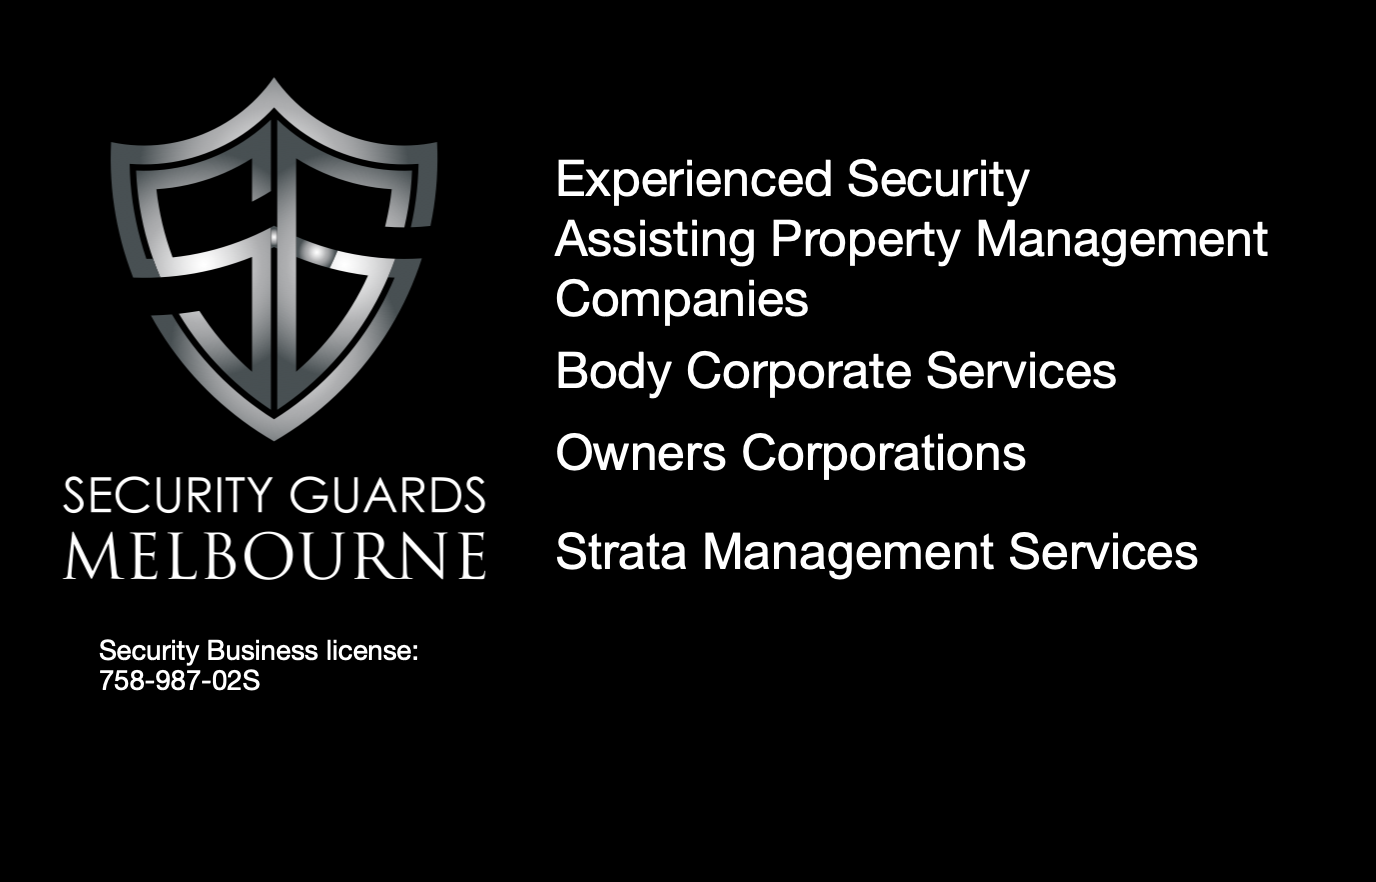 Experienced Security Melbourne